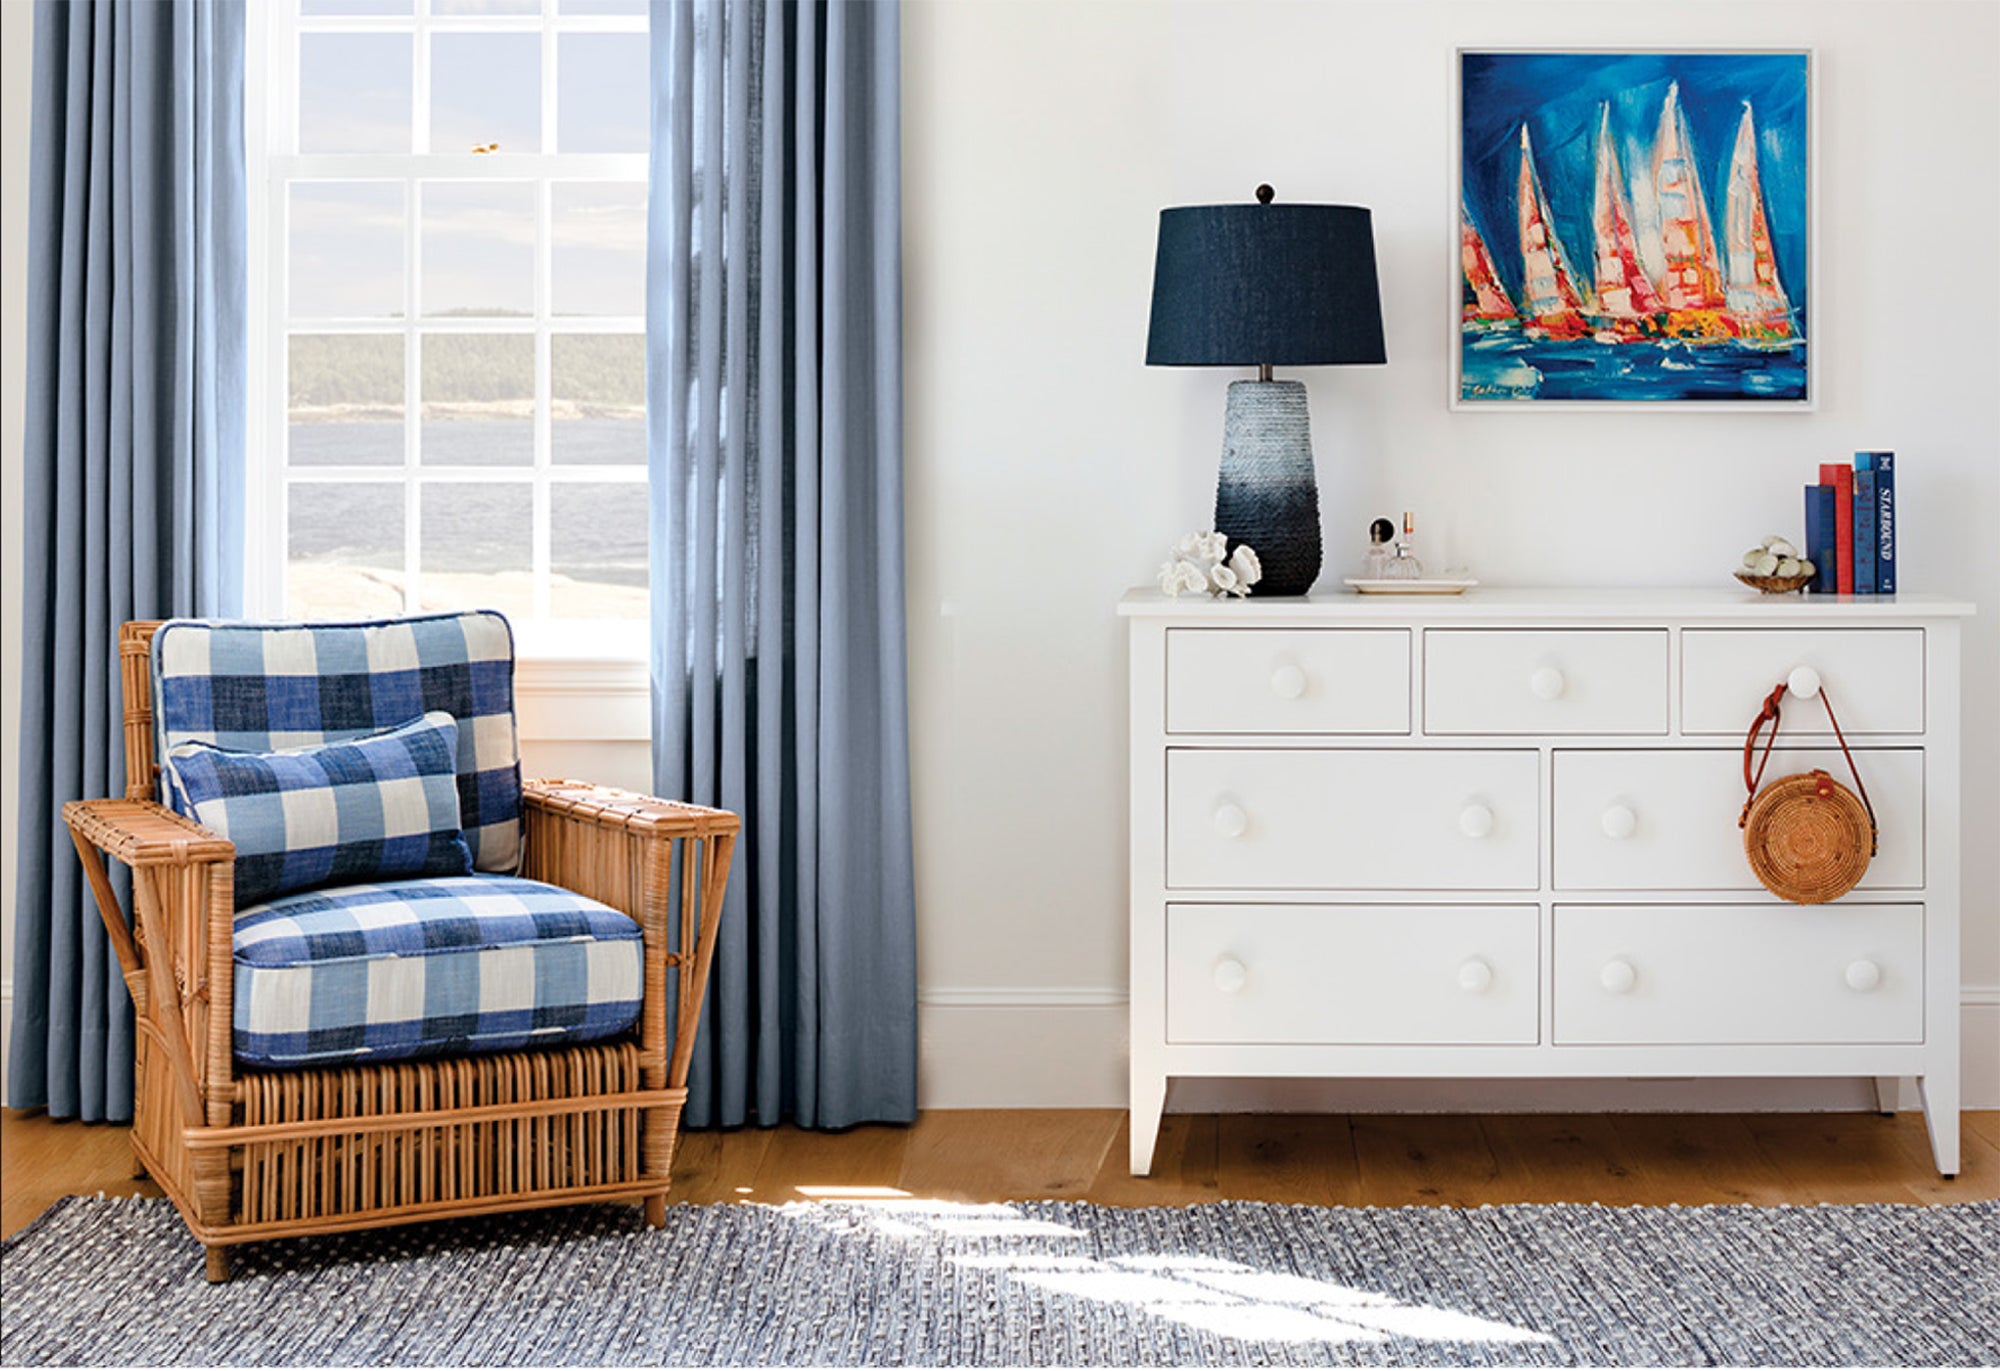 Room with white dresser and blue accents: wicker chair with denim cushions, Marlow lamp, indoor/outdoor rug, Regatta artwork